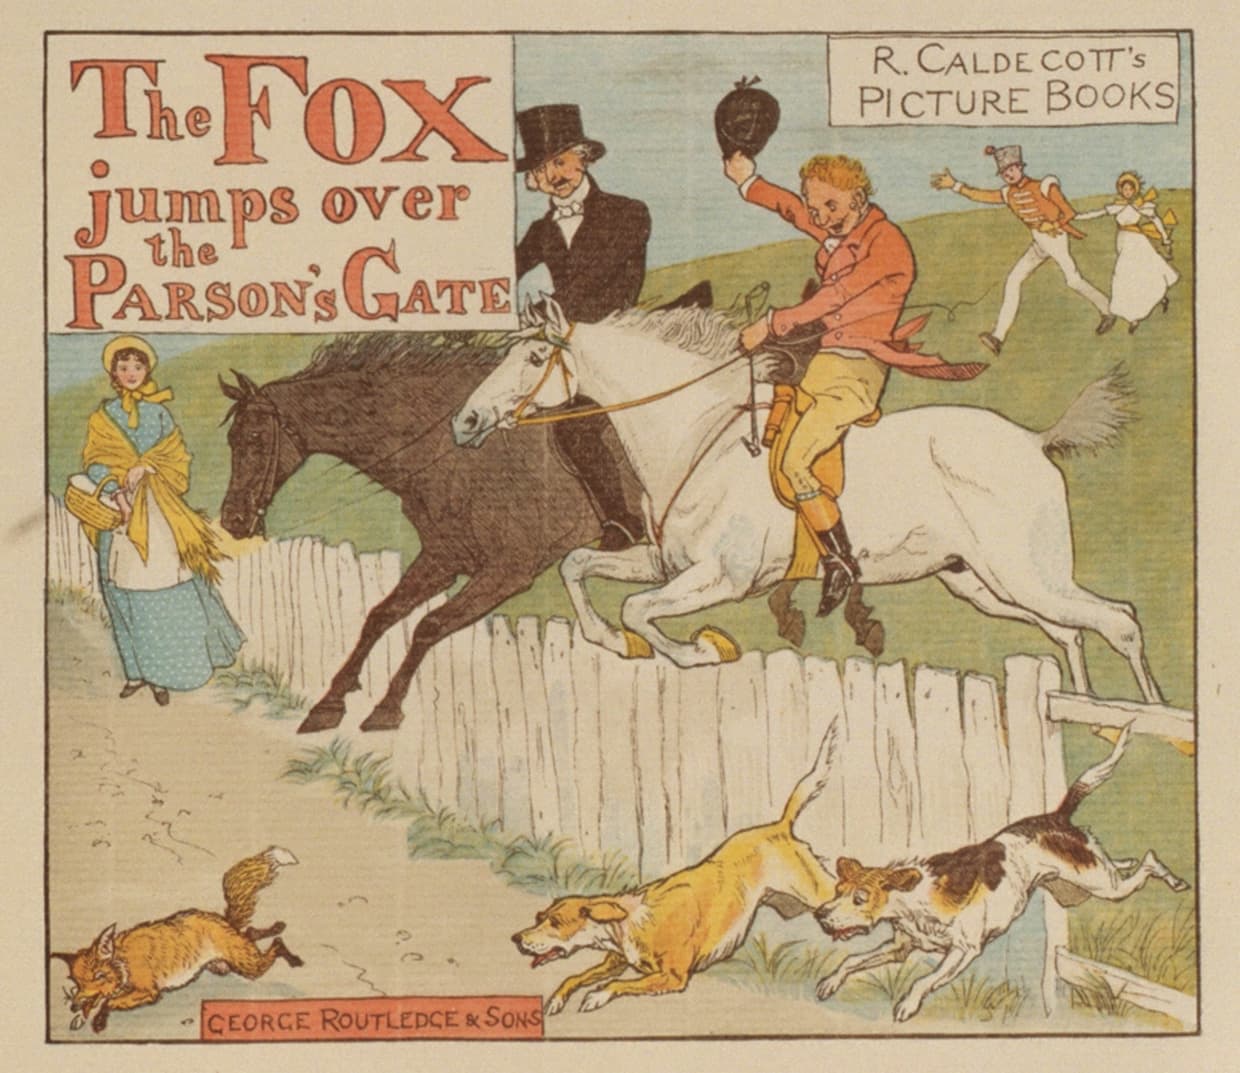 Front cover of The Fox Jumps Over the Parson’s Gate (page 369 of The Complete Collection of PICTURES and SONGS)